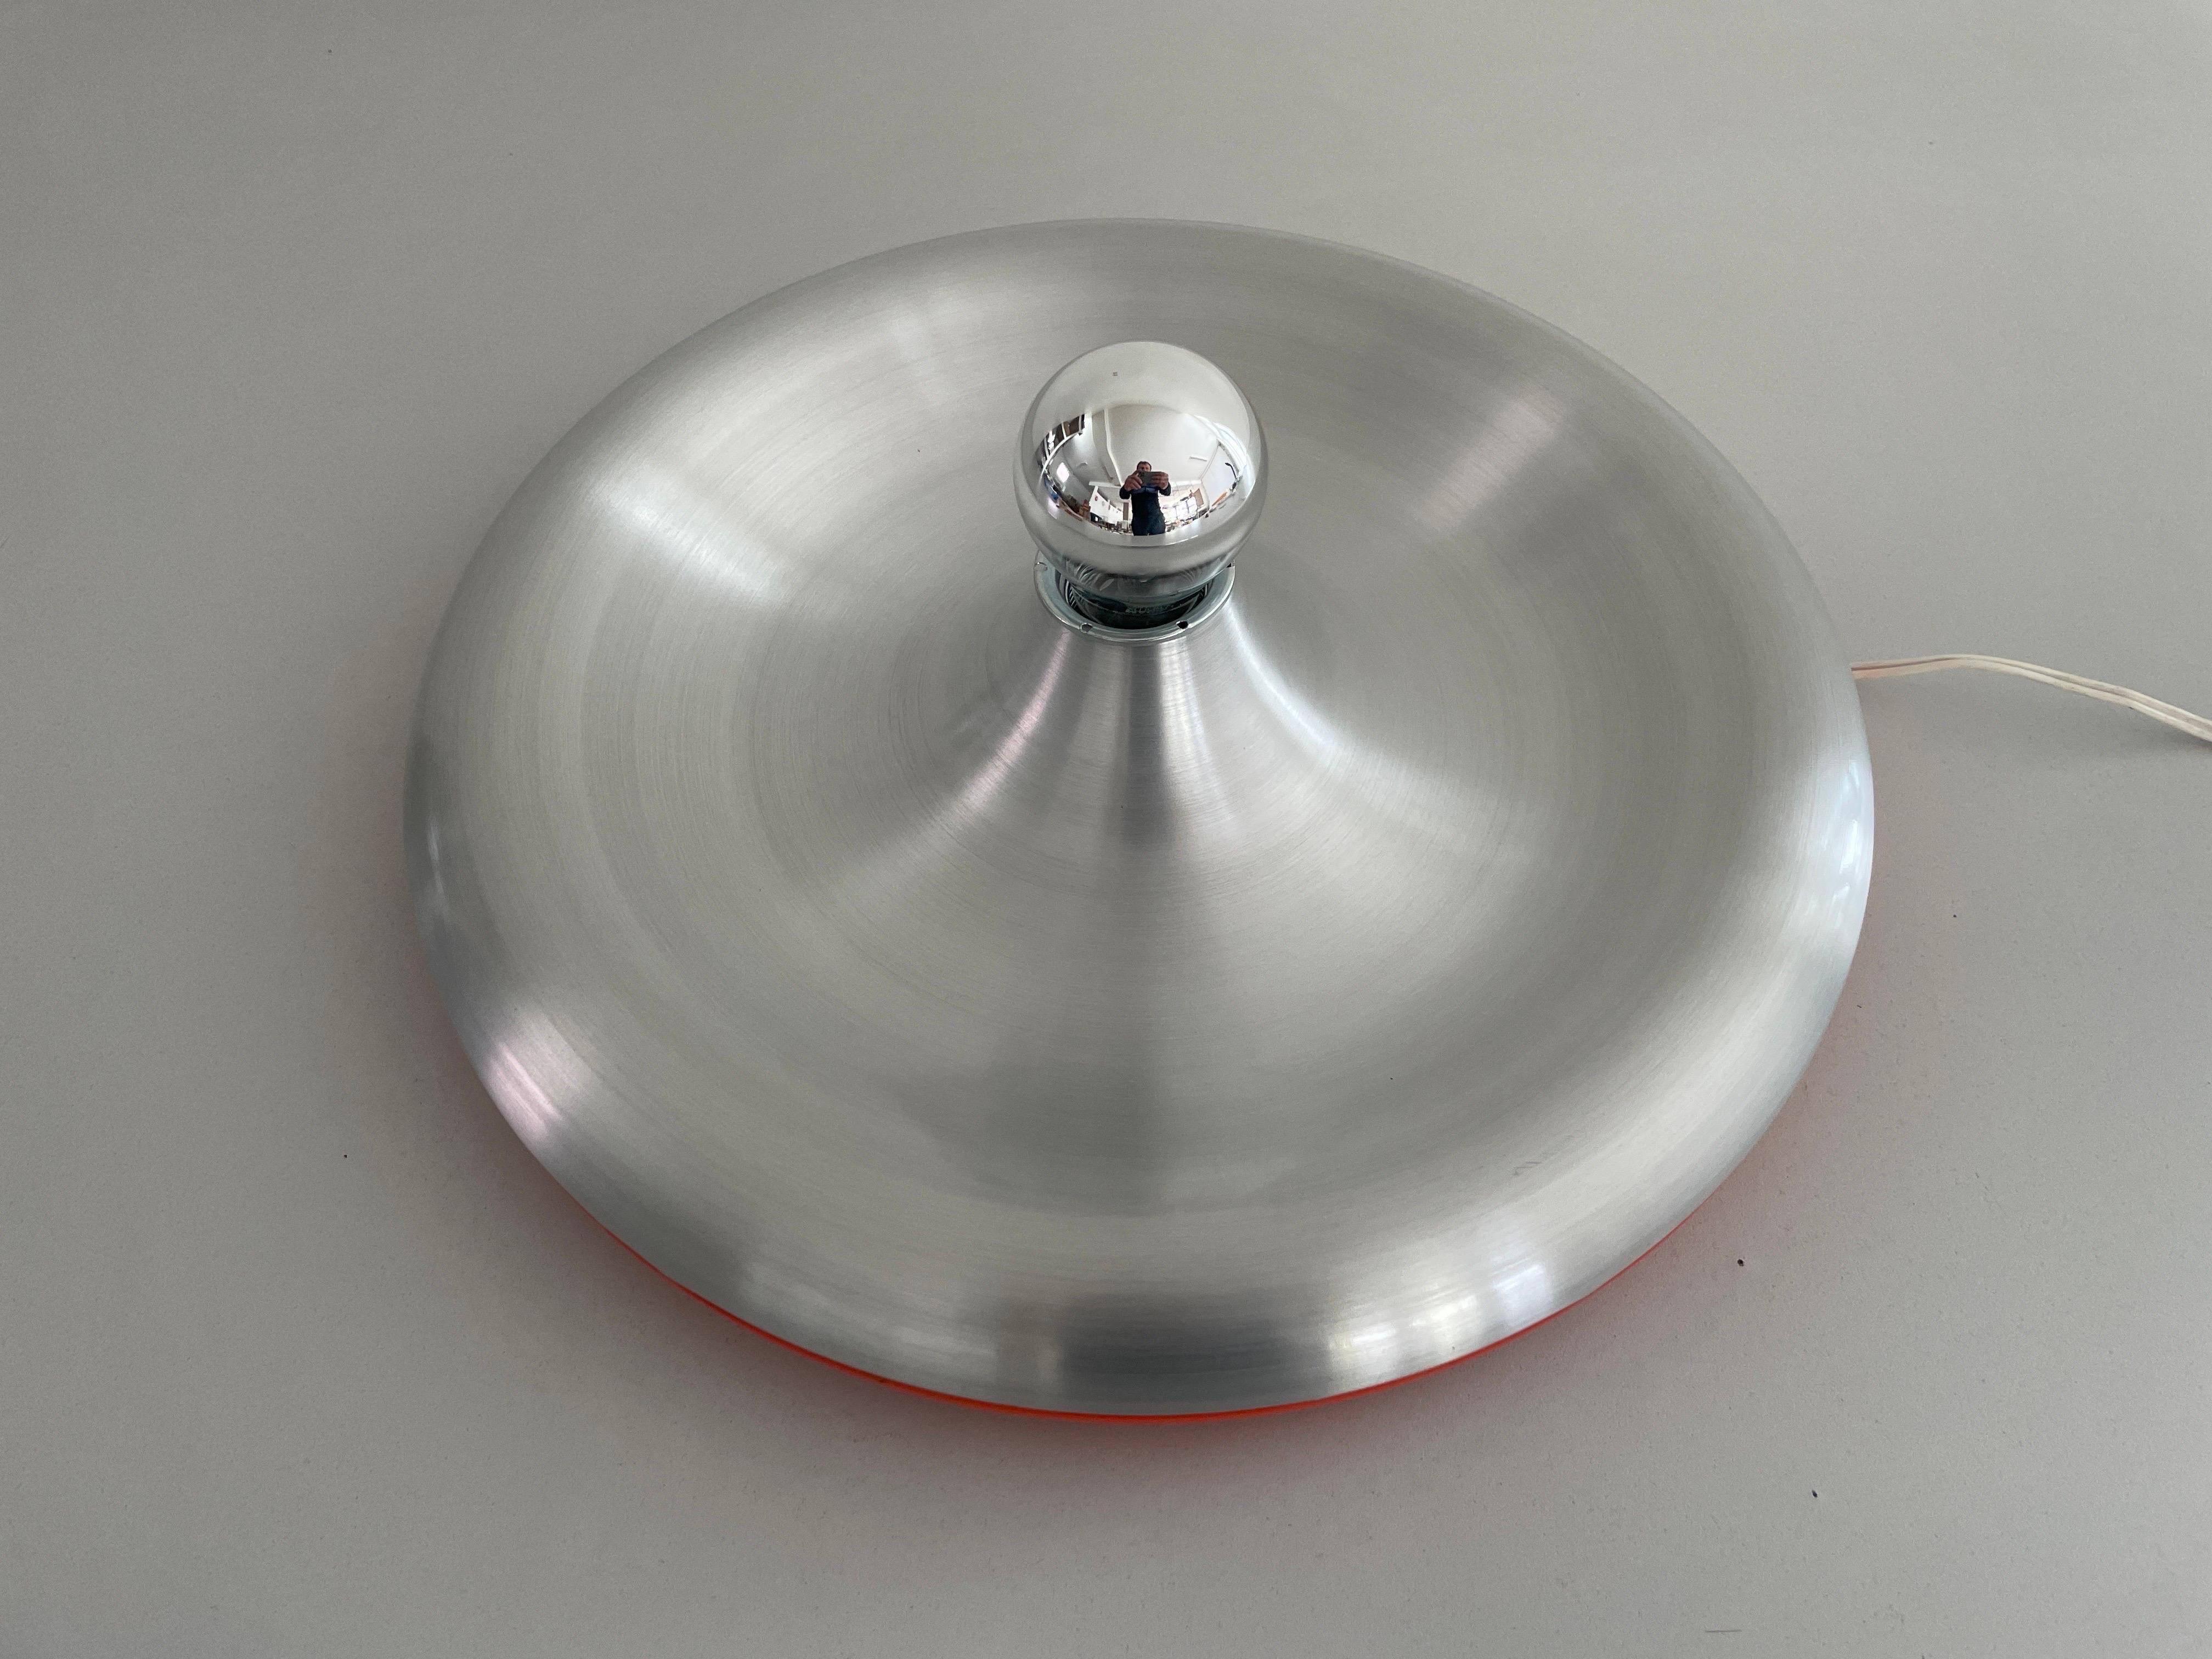 Metallic Grey and Orange Space Age Flush Mount Ceiling Lamp, 1970s, Germany For Sale 4